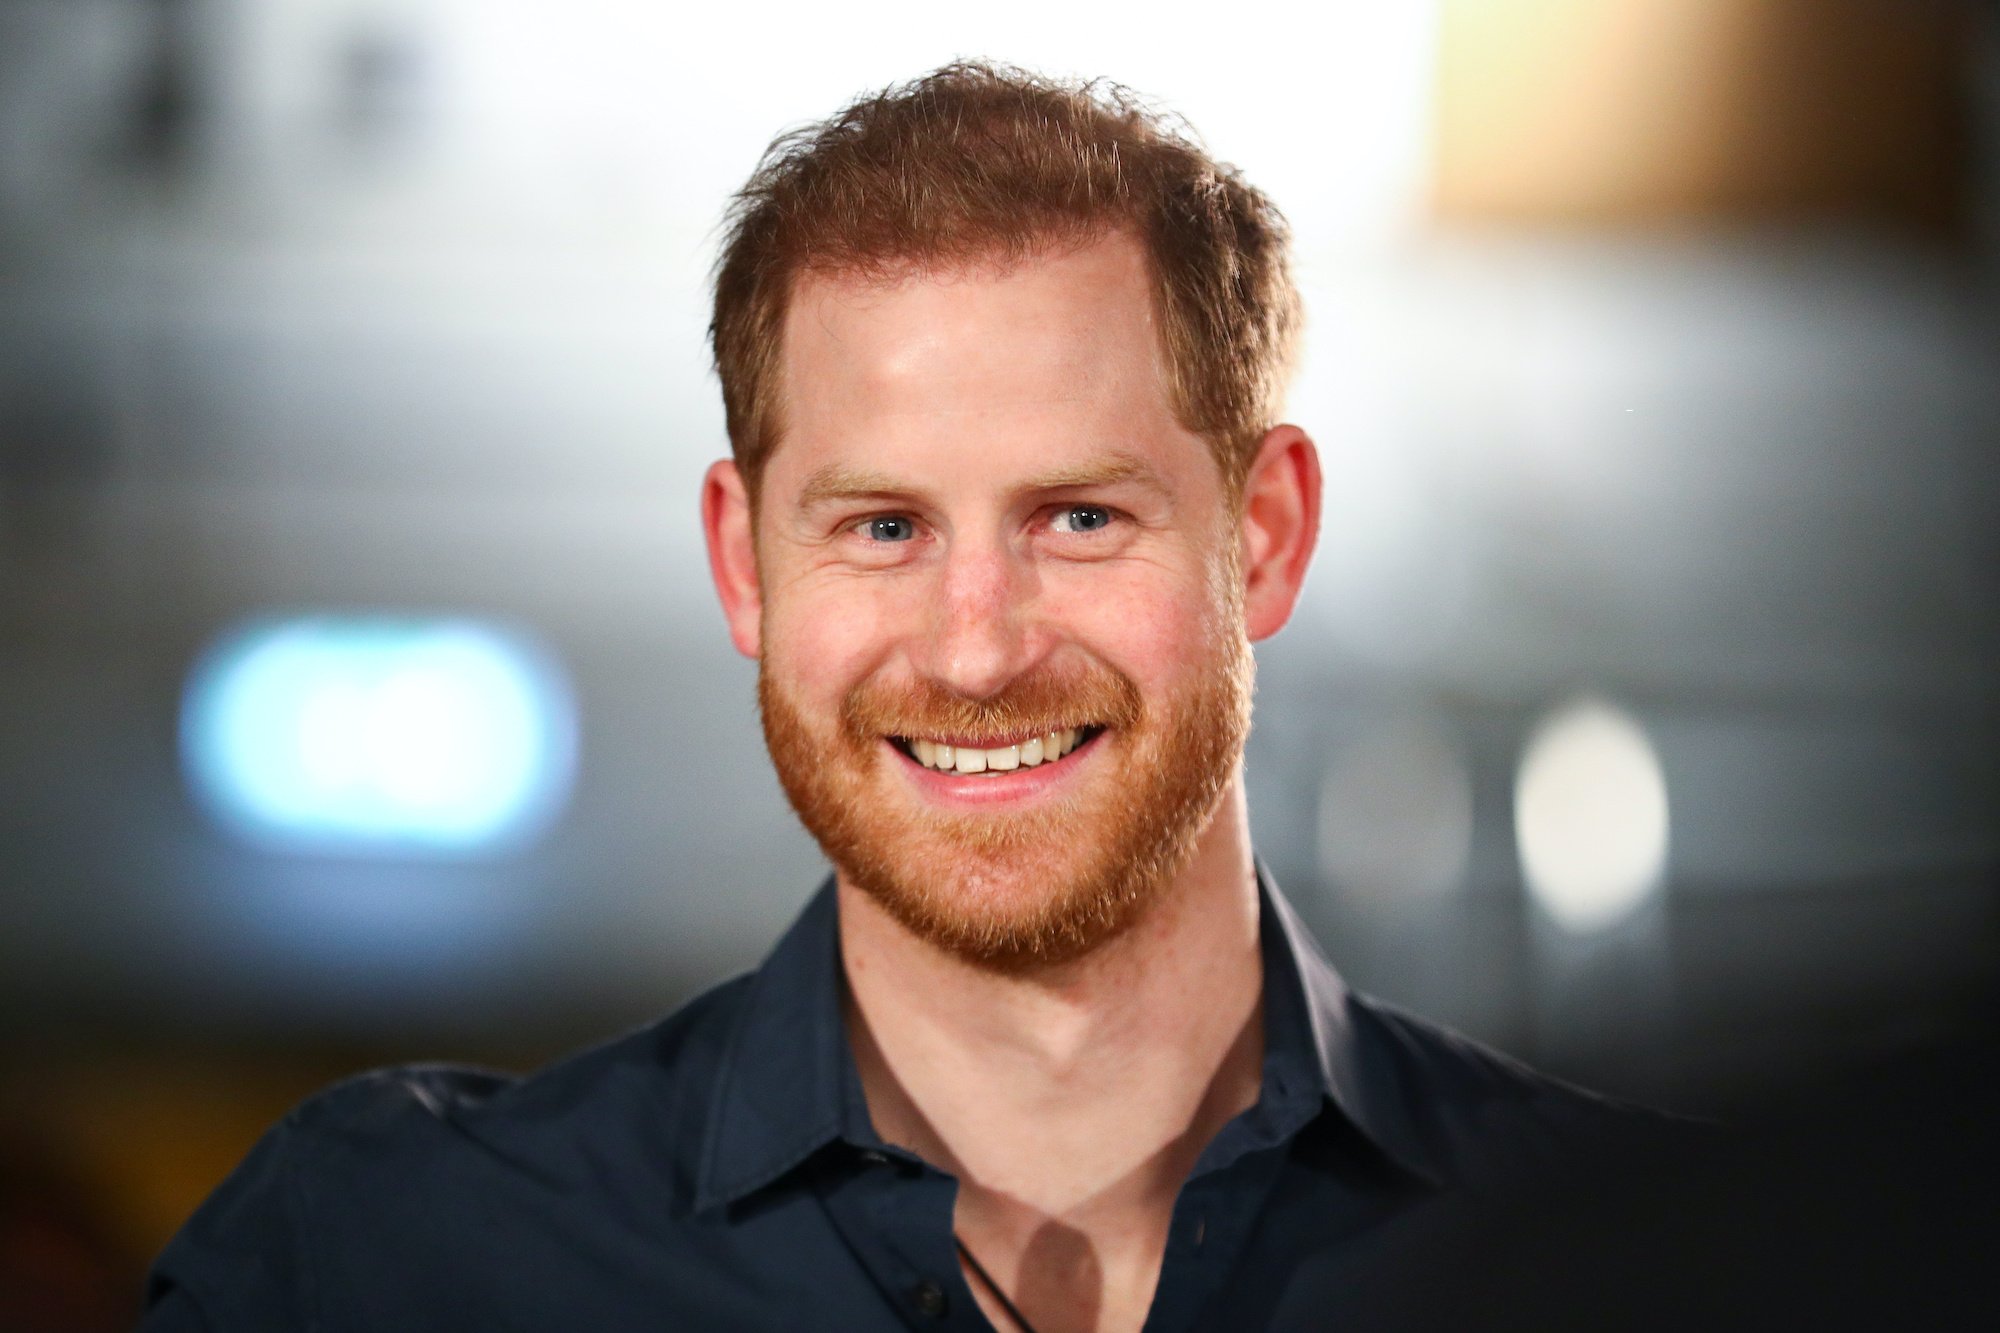 Prince Harry smiling in front of a blurred background